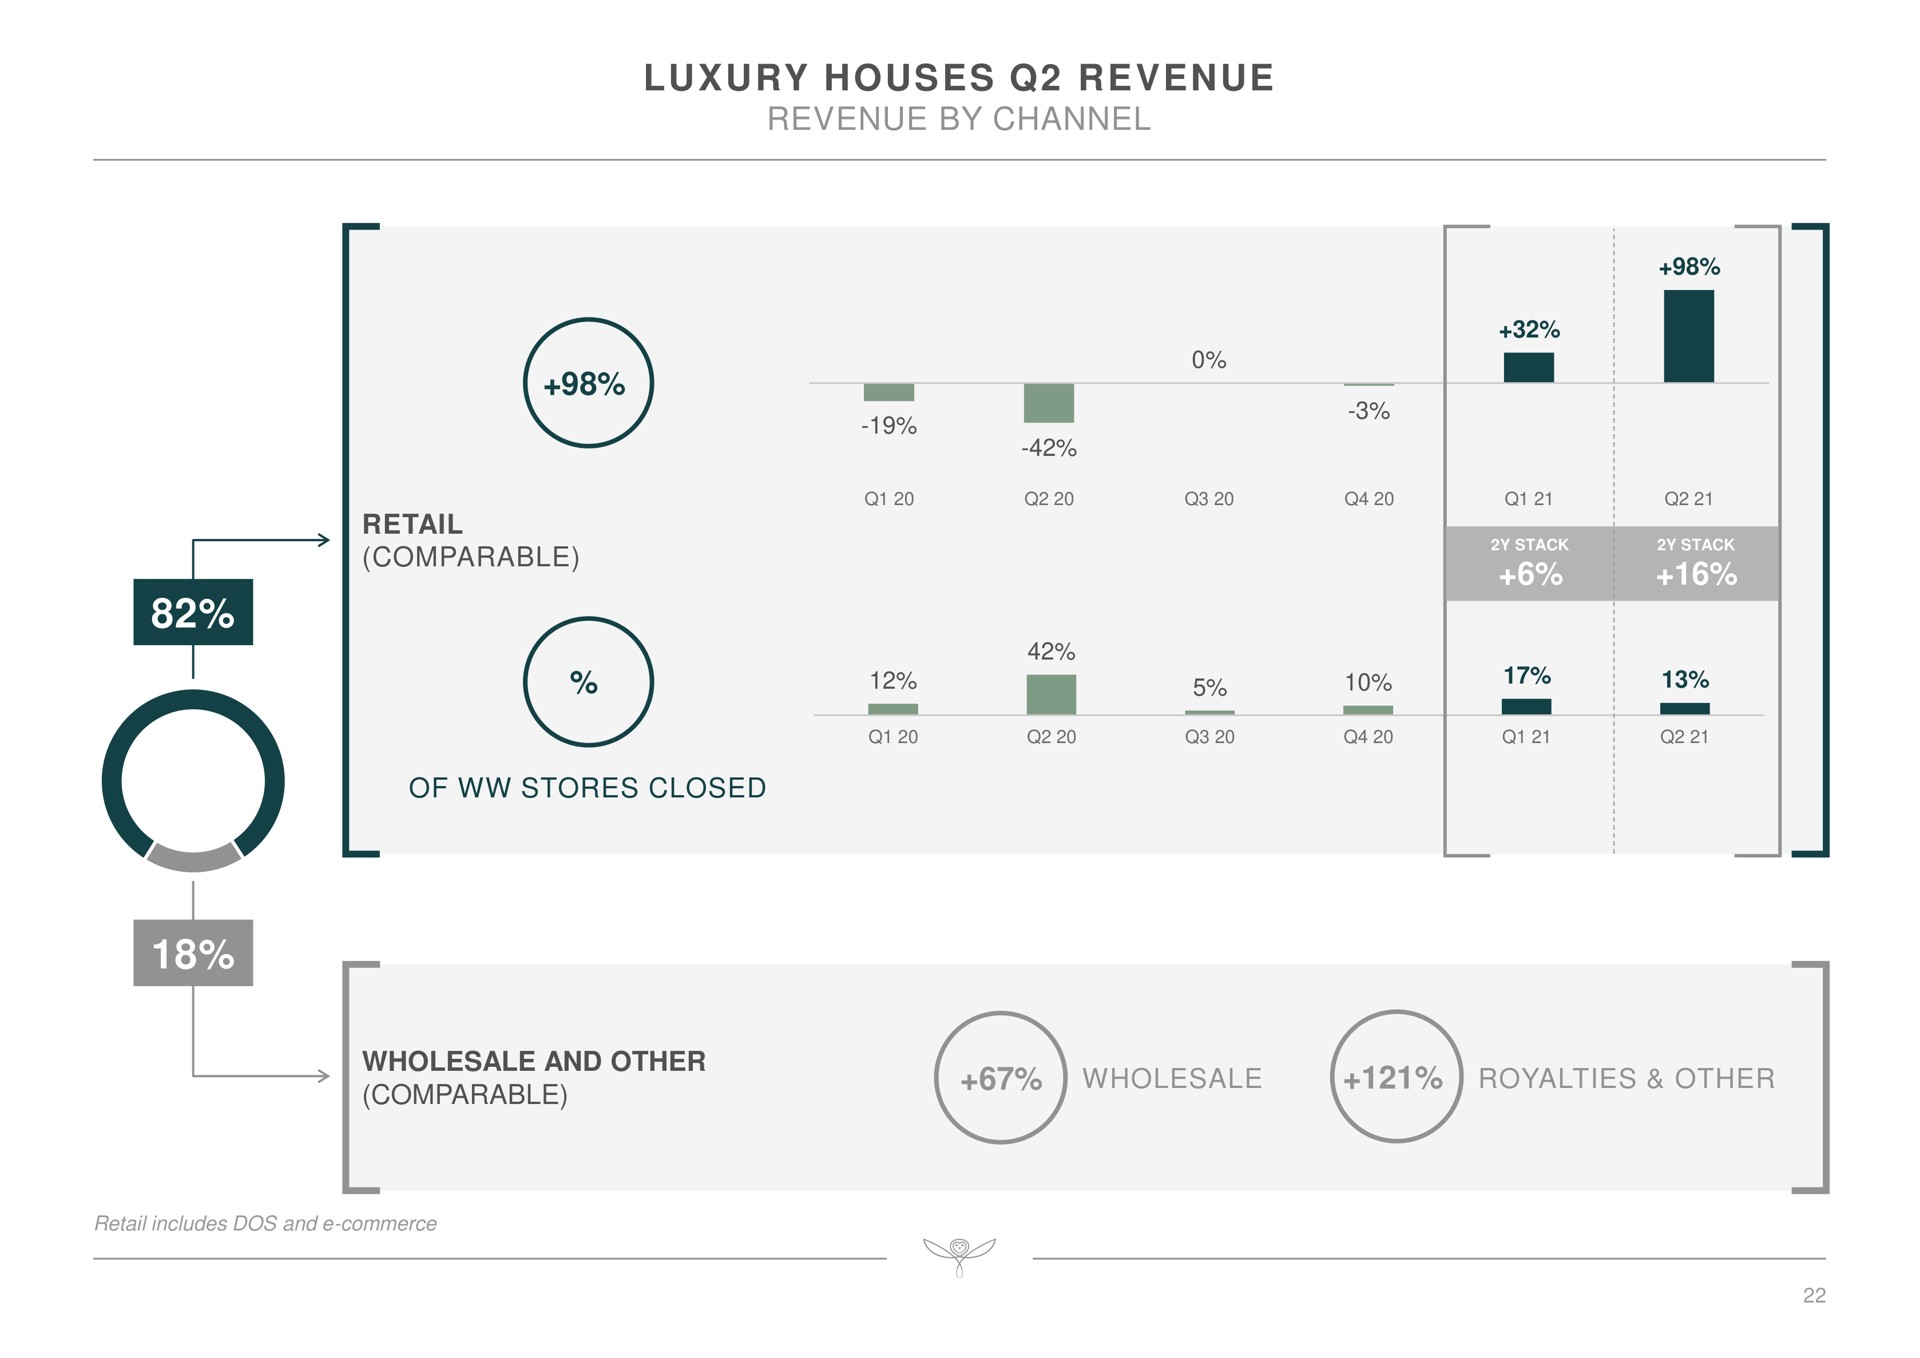 luxury houses revenue revenue by channel comparable of stores closed pate comparable | Kering